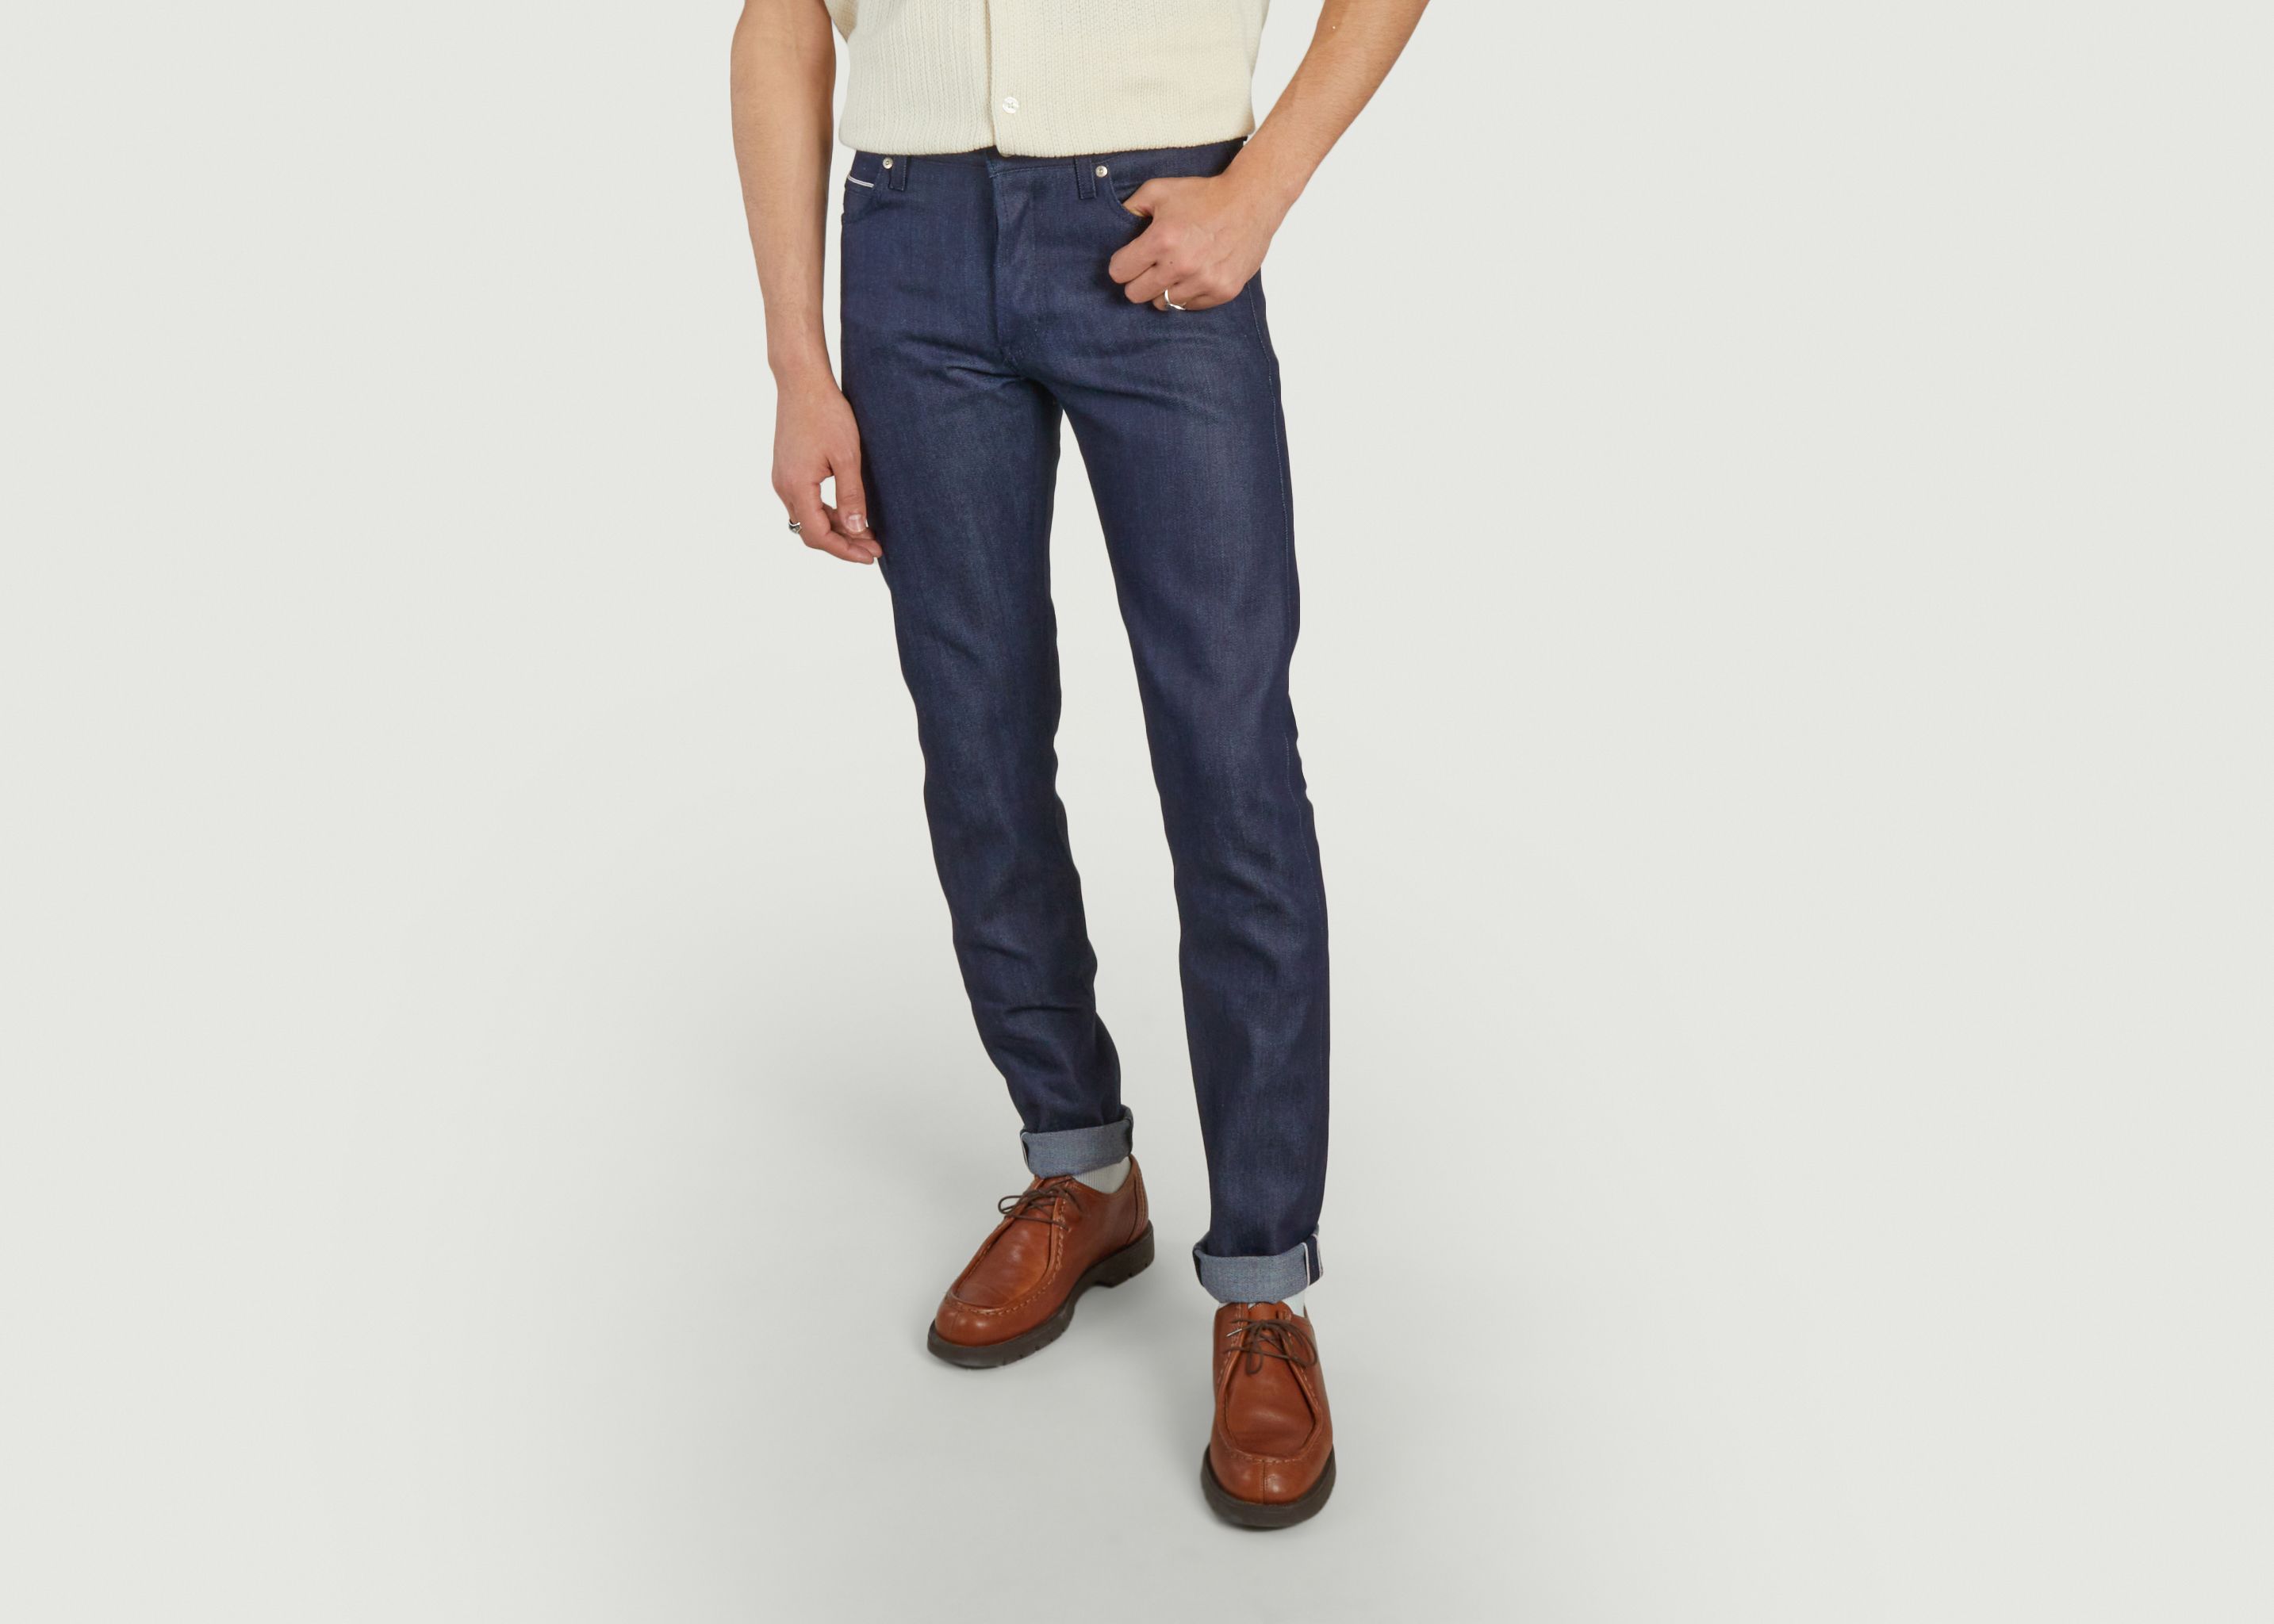 Super Guy Spring Garden Selvedge Jeans - Naked and Famous